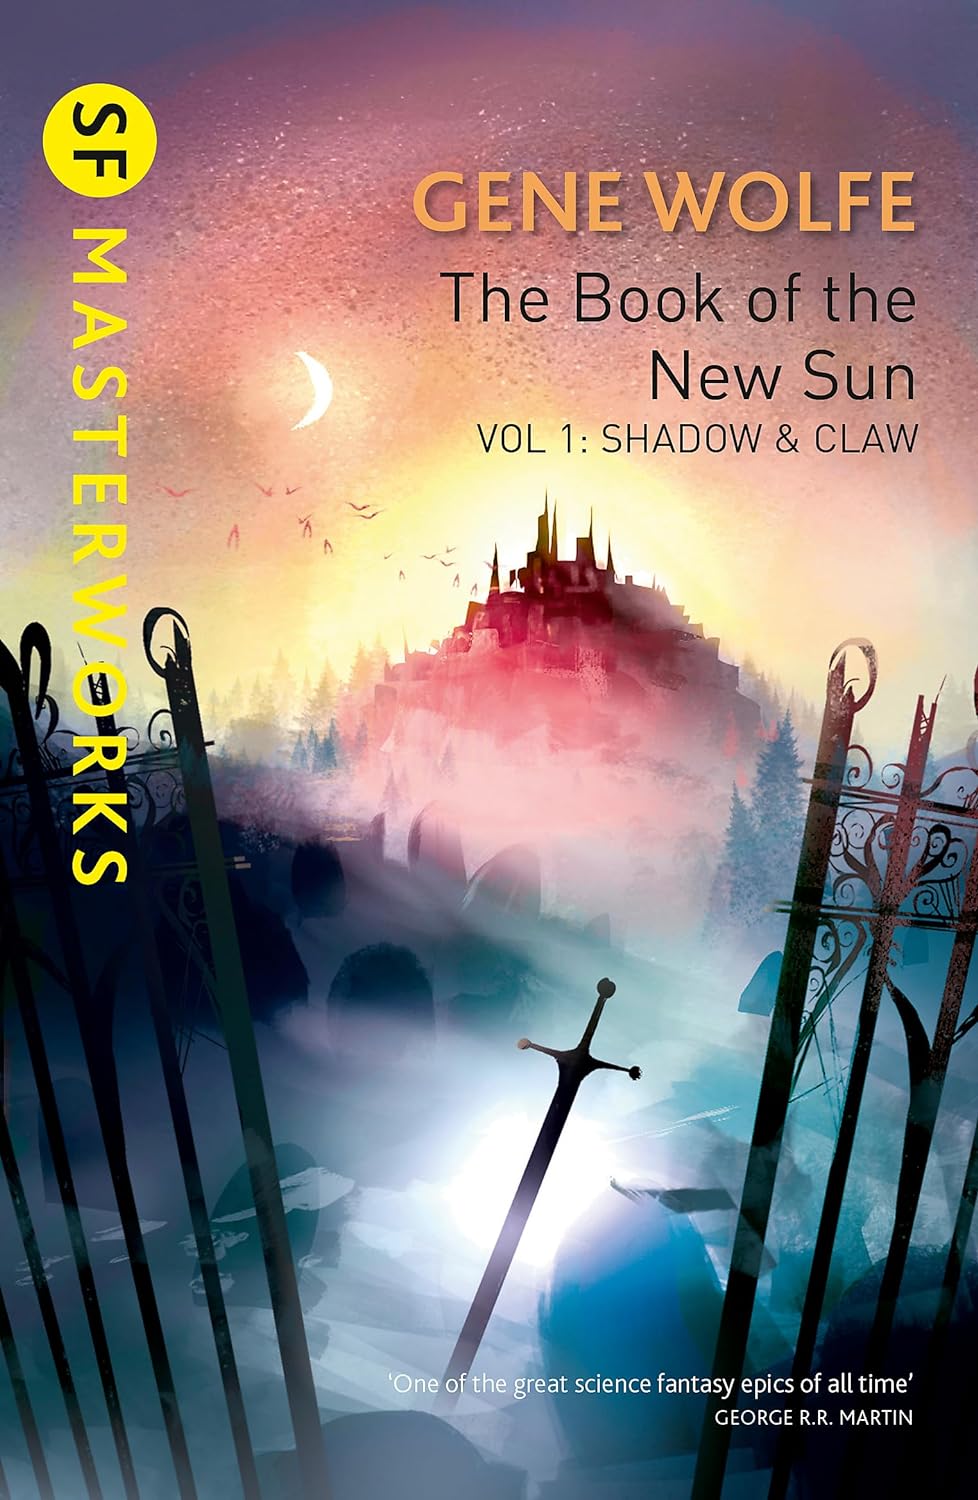 The Book of the New Sun. Volume 1: Shadow & Claw | Gene Wolfe